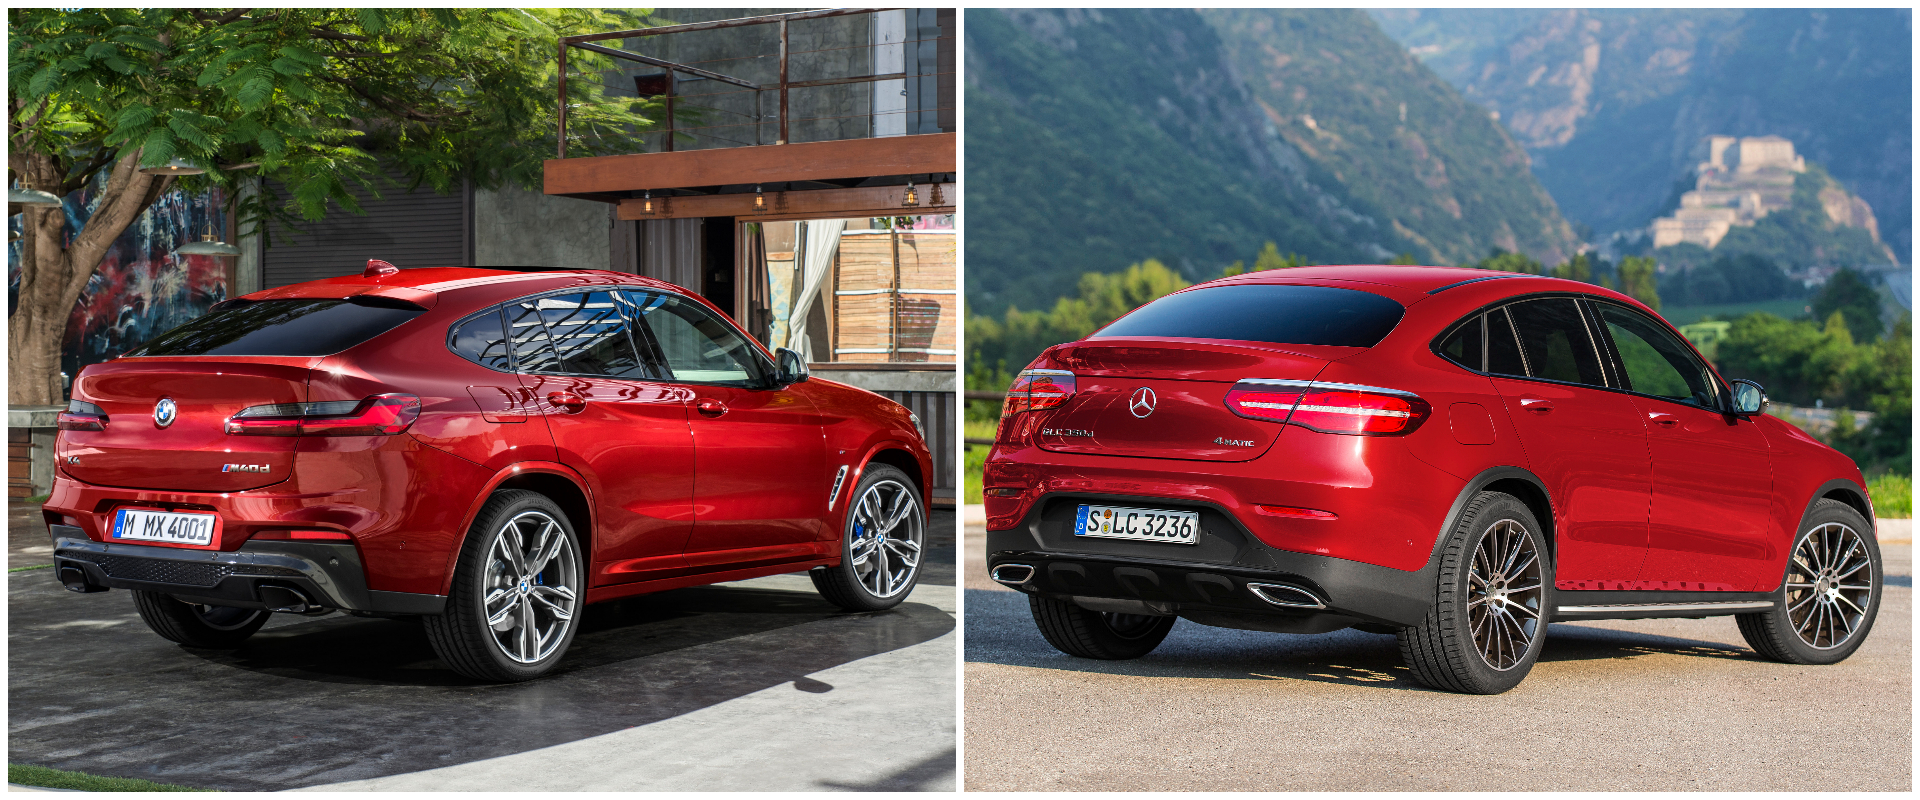 New BMW X4 Or Mercedes GLC Coupe Yes, That’s A Tough One